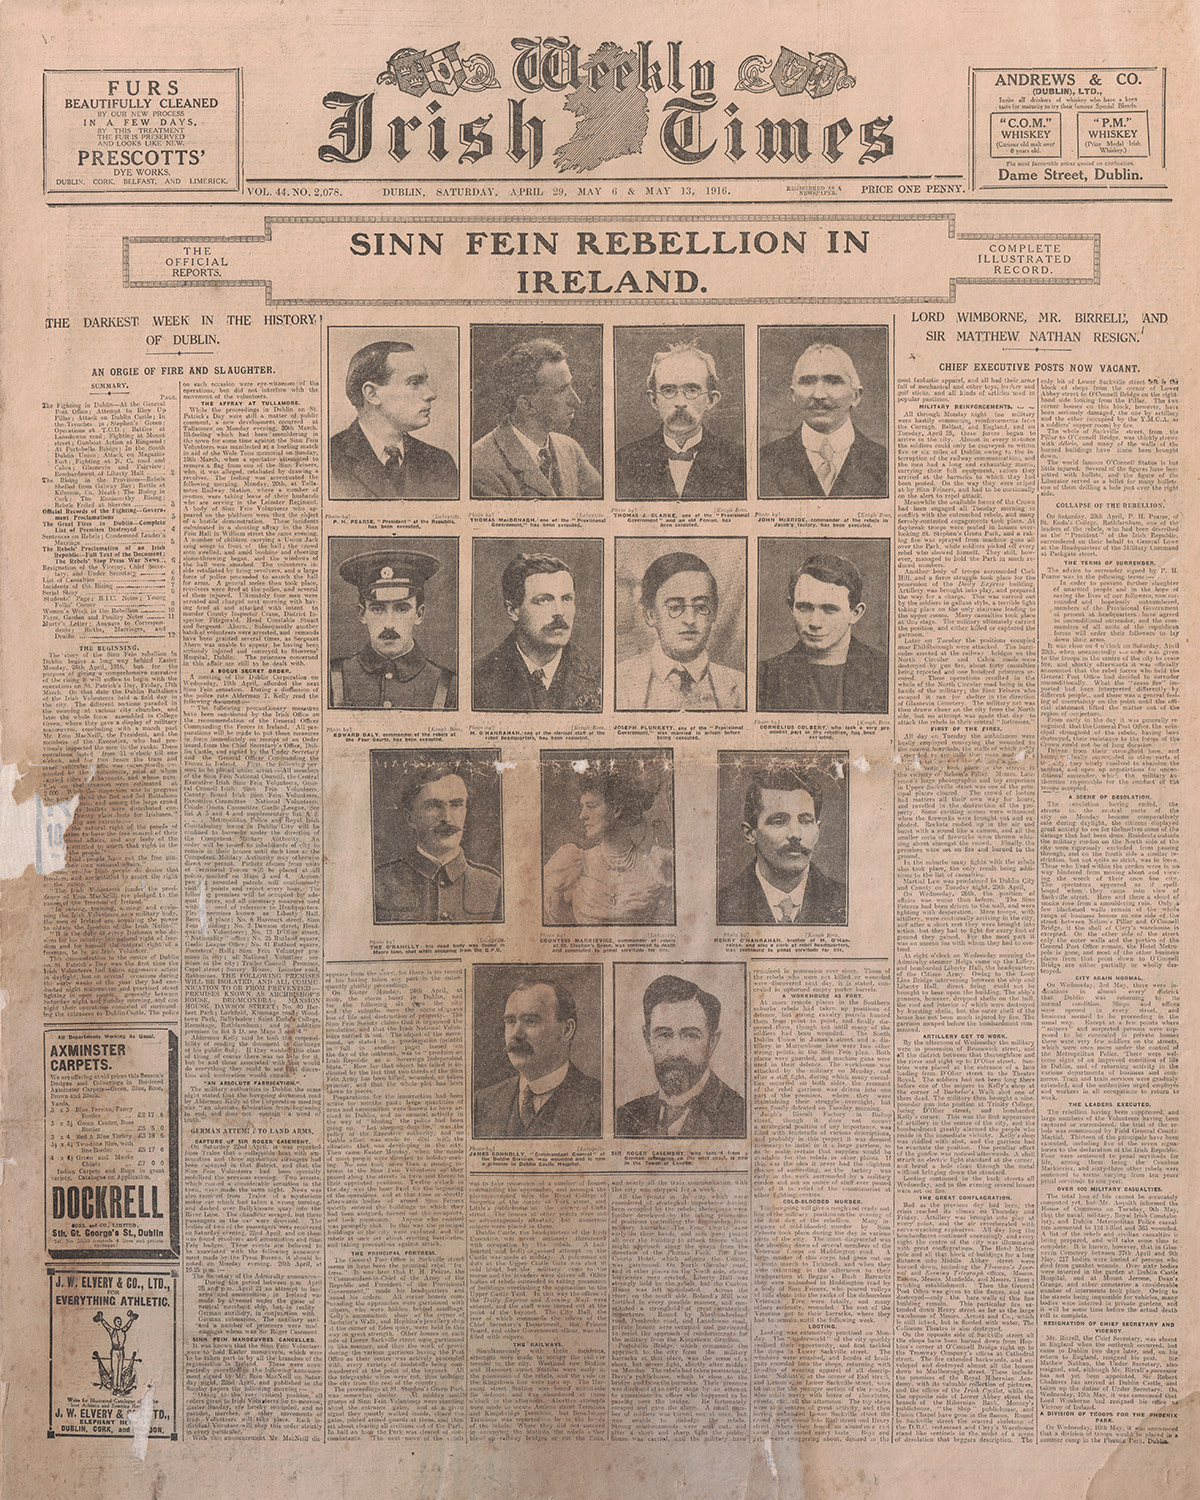 The cover of a 1916 issue of The Weekly Irish Times newspaper